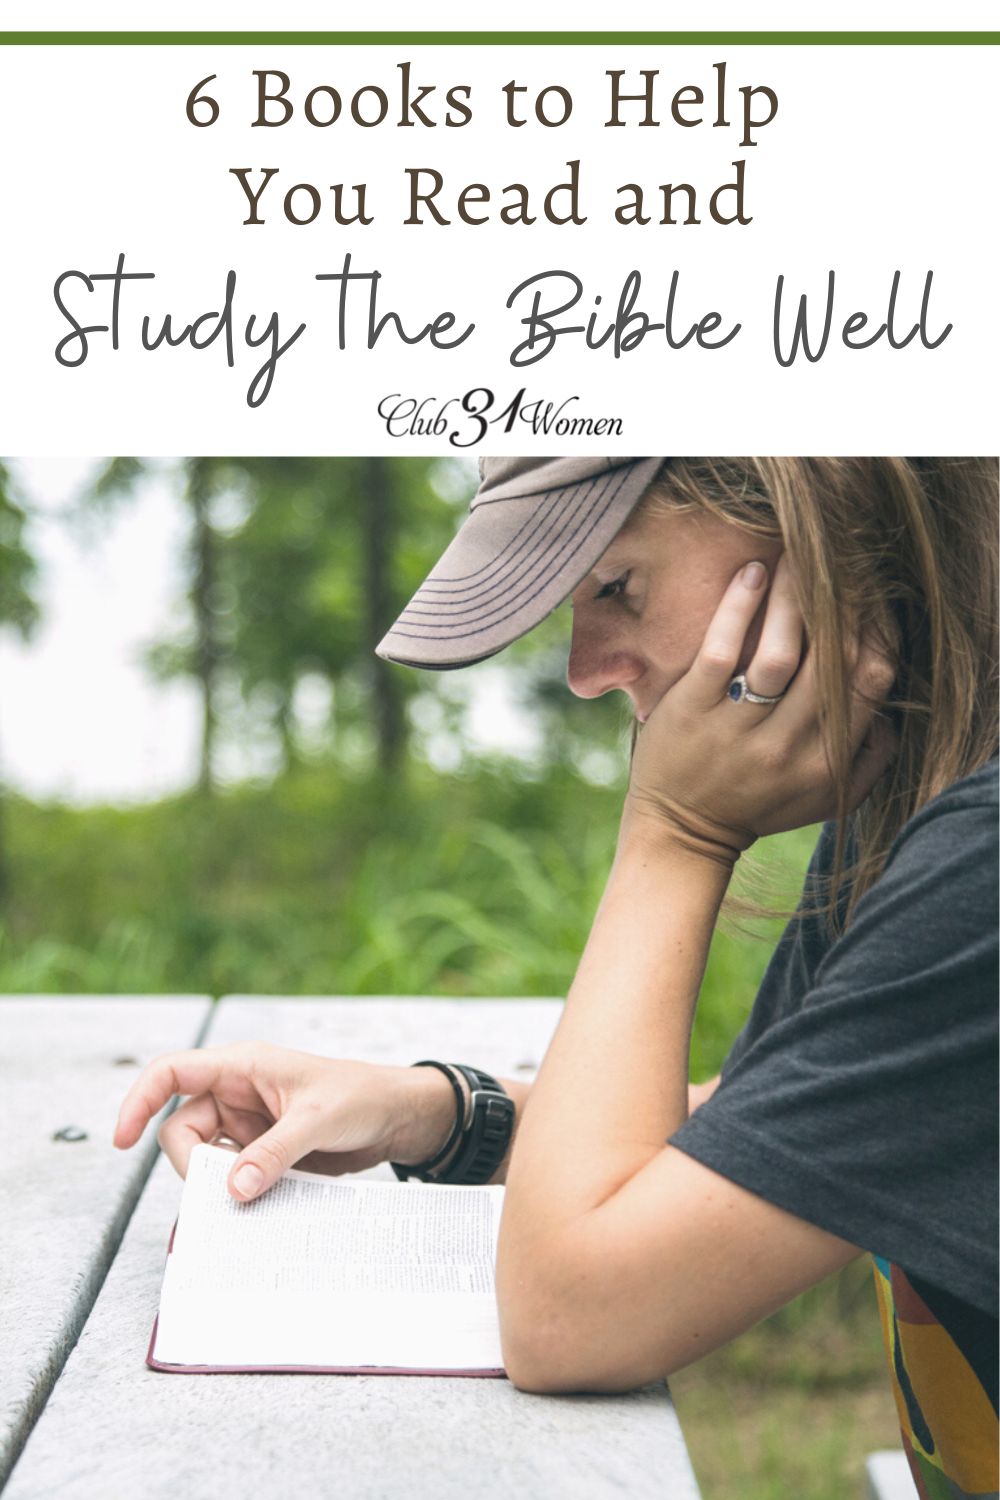 When we learn to study the Bible we can gain a deeper understanding of God and cultivate a meaningful relationship with Him. via @Club31Women